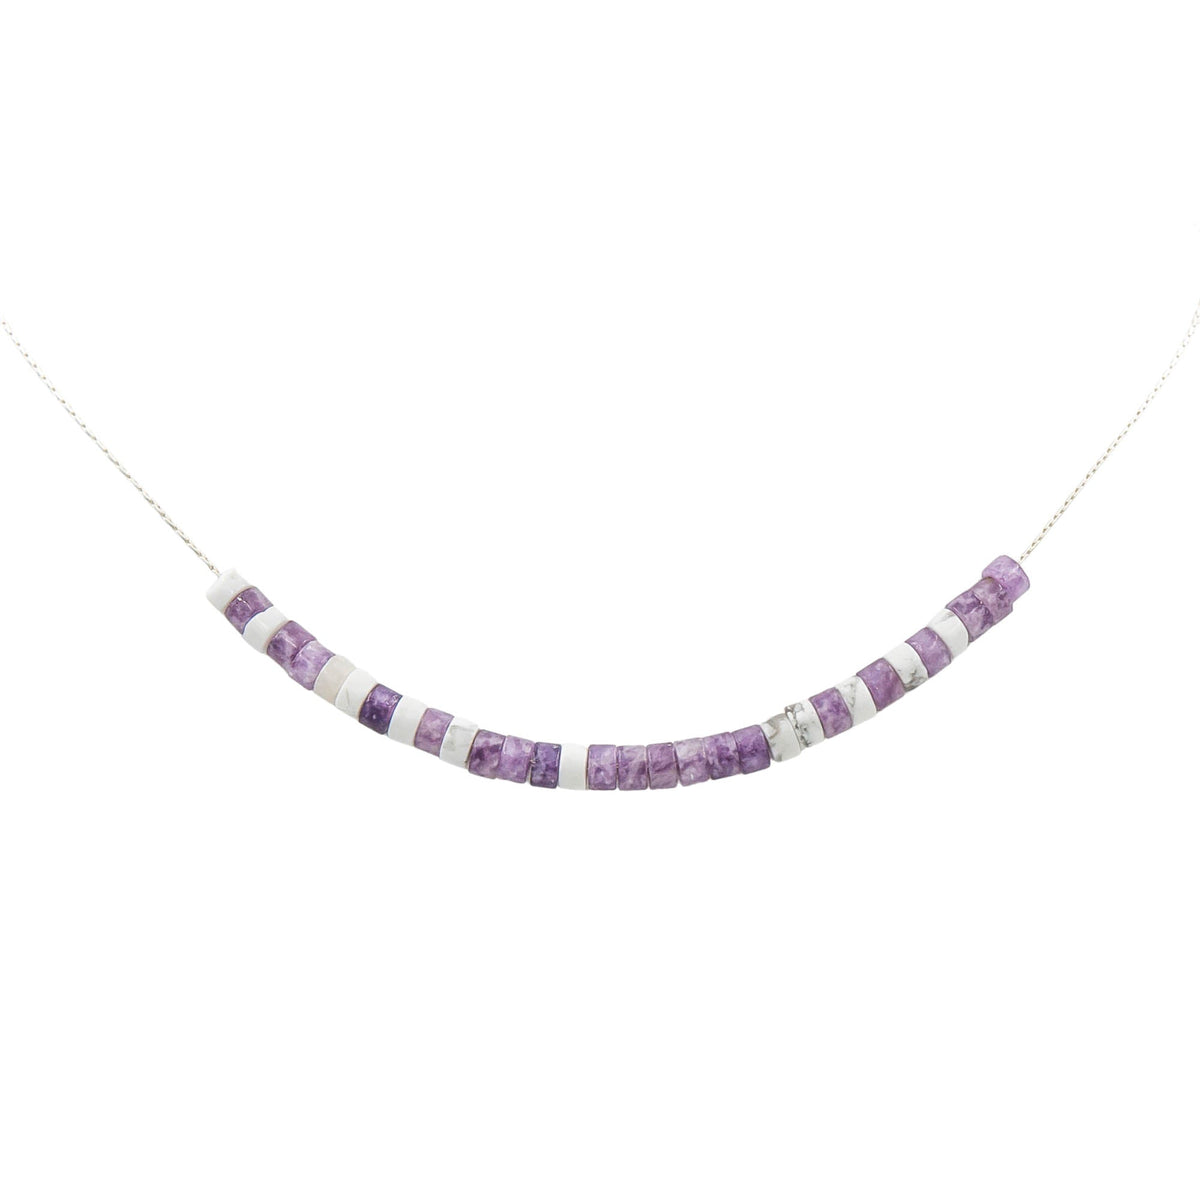 Earth Song Jewelry Custom Personalized CANCER SUCKS Morse Code Necklace in Sterling Silver and Lepidolite Natural Purple Stone for Women